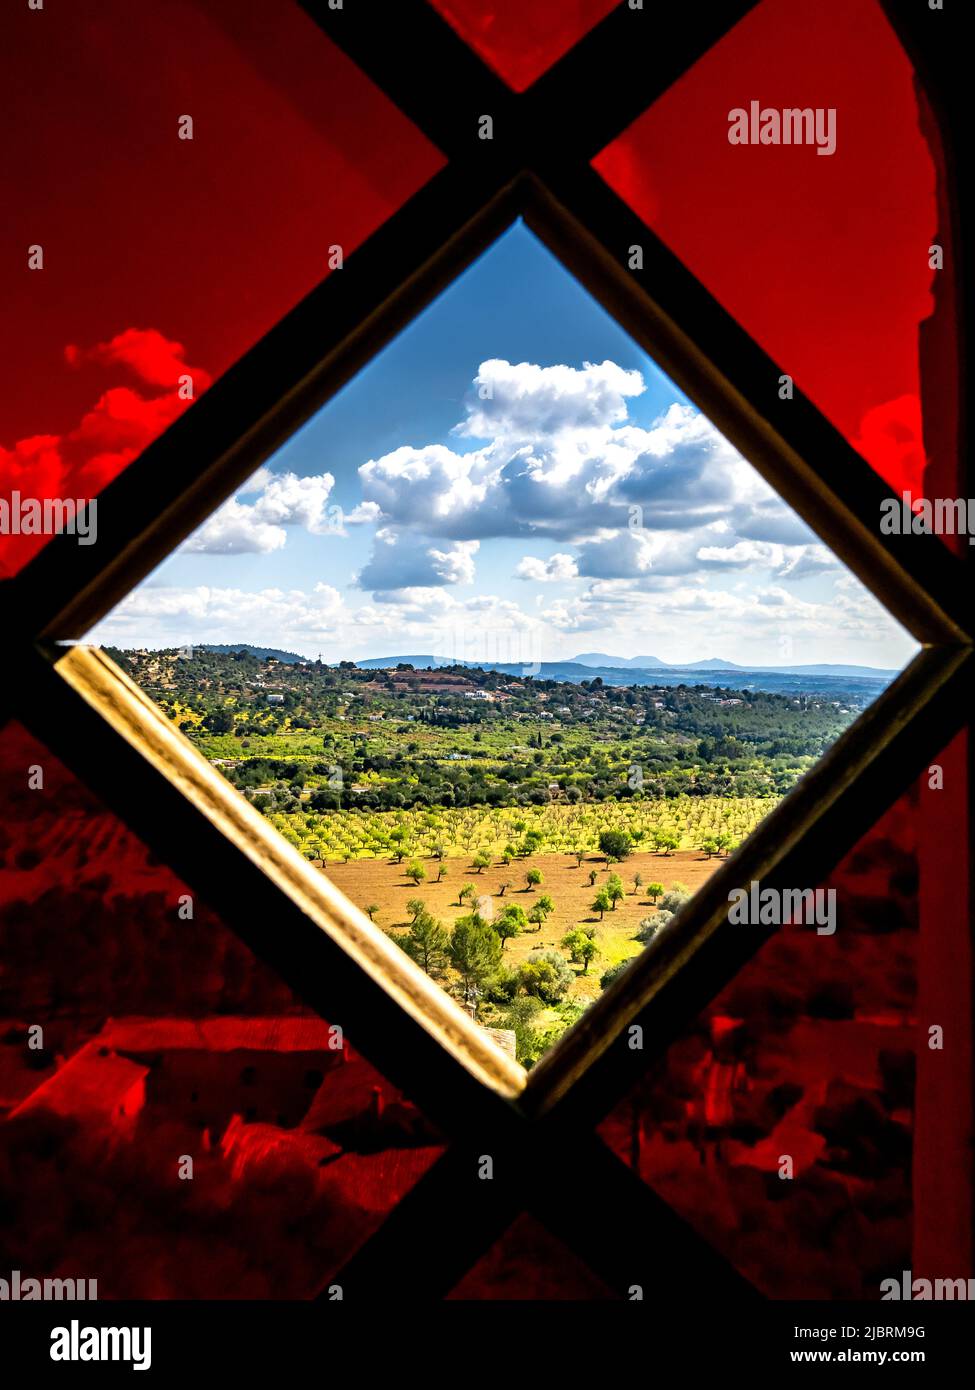 Portrait taken from the Sa Muntanyeta southern slopes of a lush landscape seen through the missing glass in a red colored glass window from the inside Stock Photo